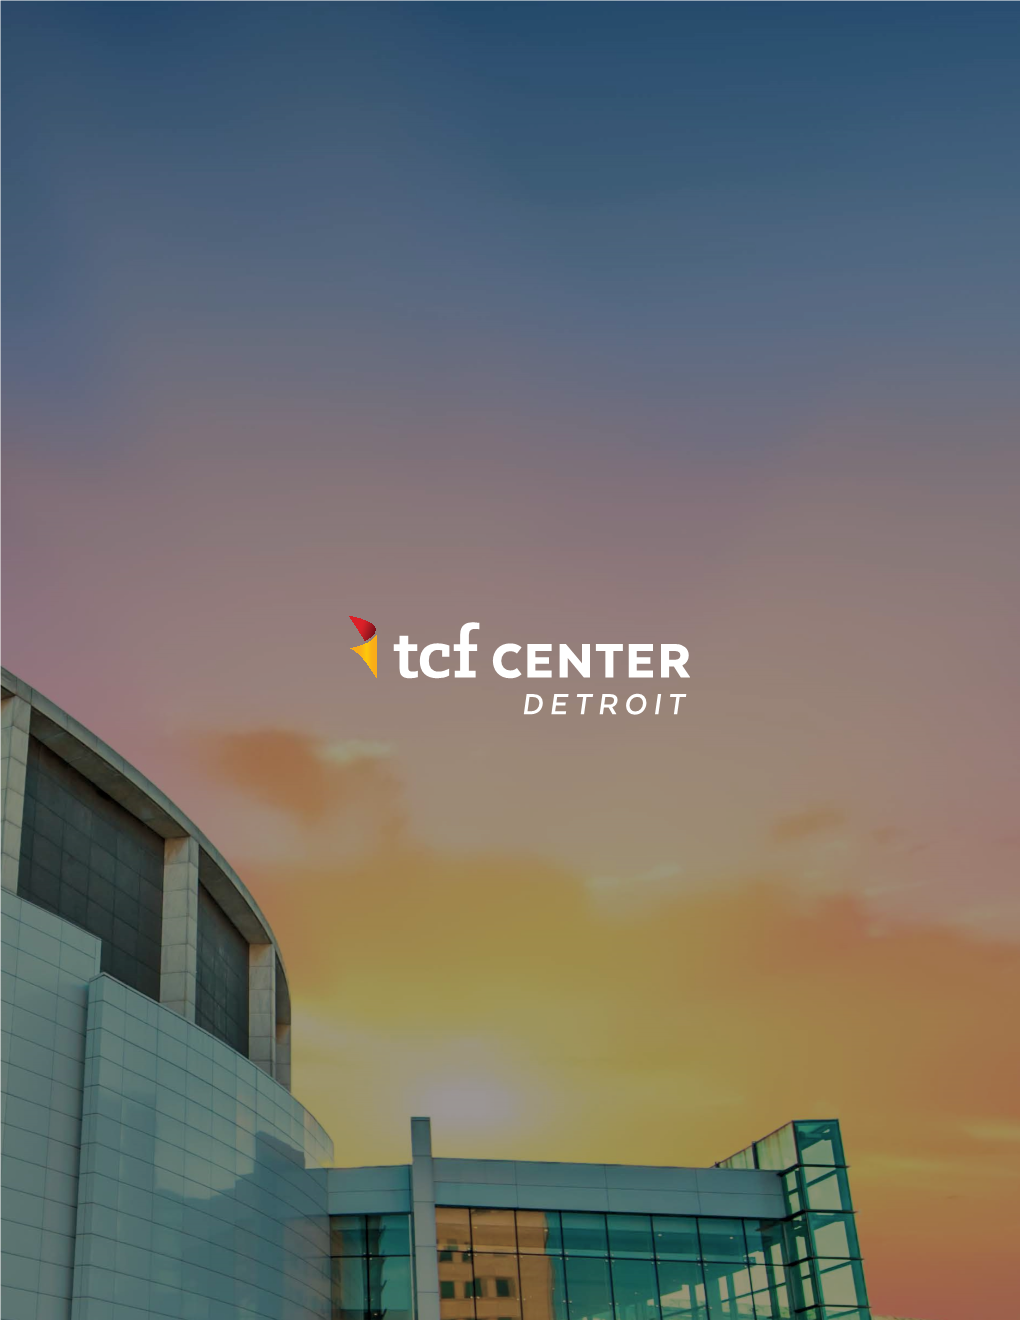 Download the TCF Center Brochure